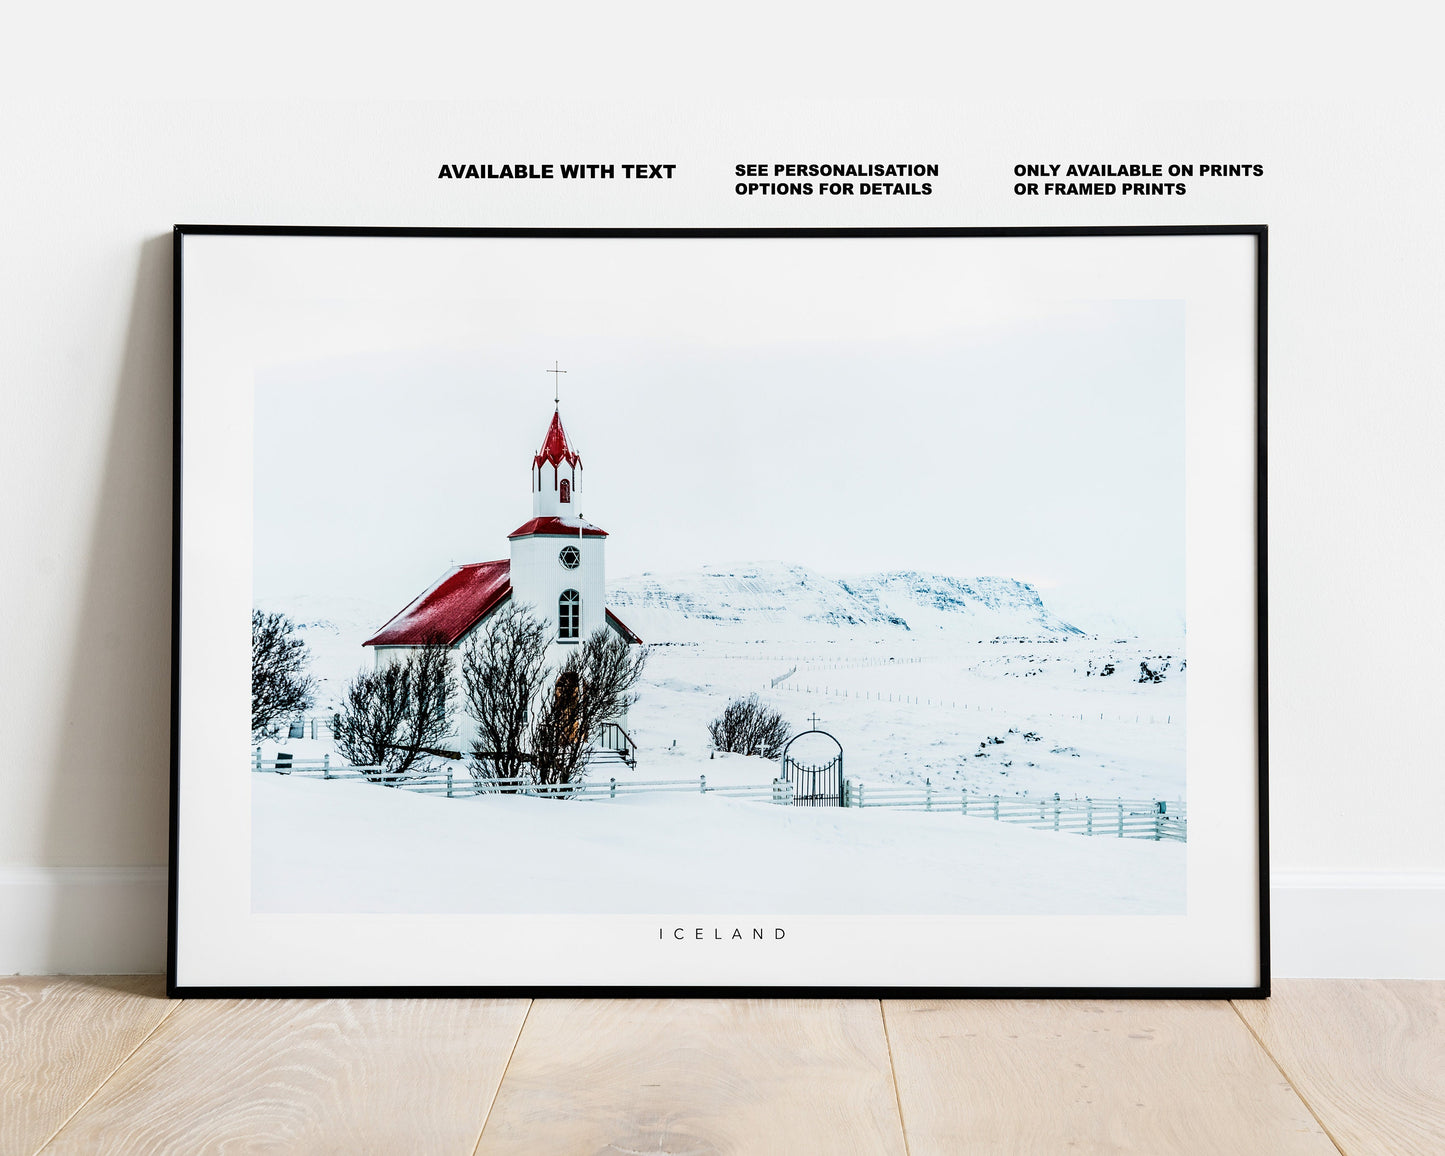 Icelandic Church - Iceland Photography Print - Iceland Wall Art - Iceland Poster - Landscape - Iceland Print - Contemporary - Winter - Snow